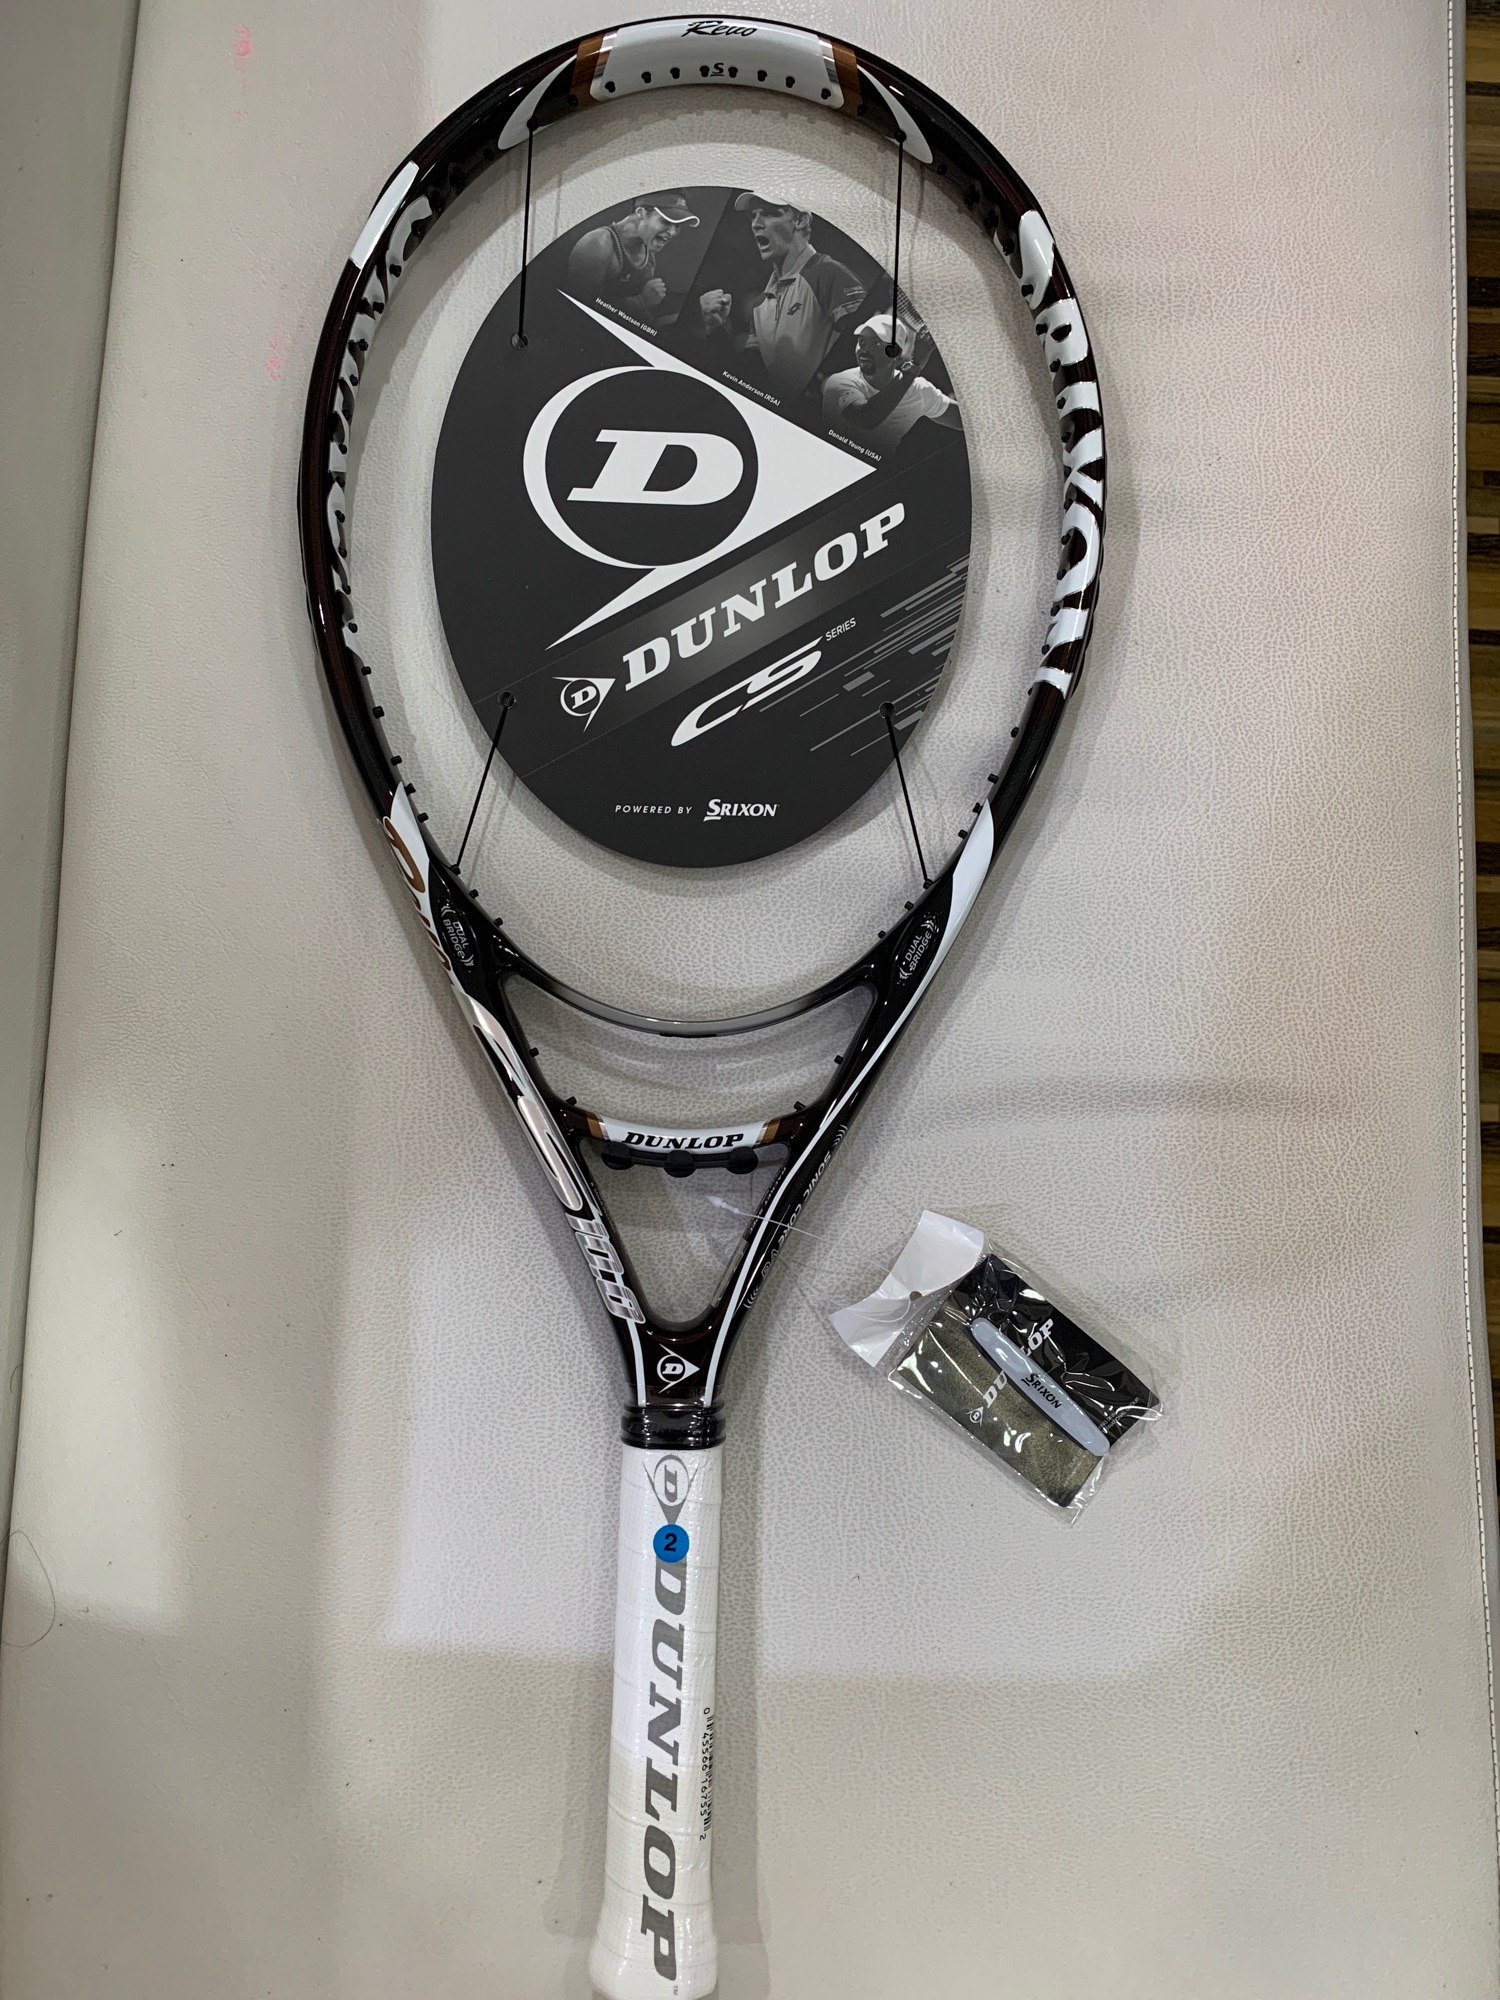 Dunlop ROVO CS 10.0 Headsize 110in Weight 255g. Gripsize4 1/4(L2). Length 27.5 in string pattern 16*18